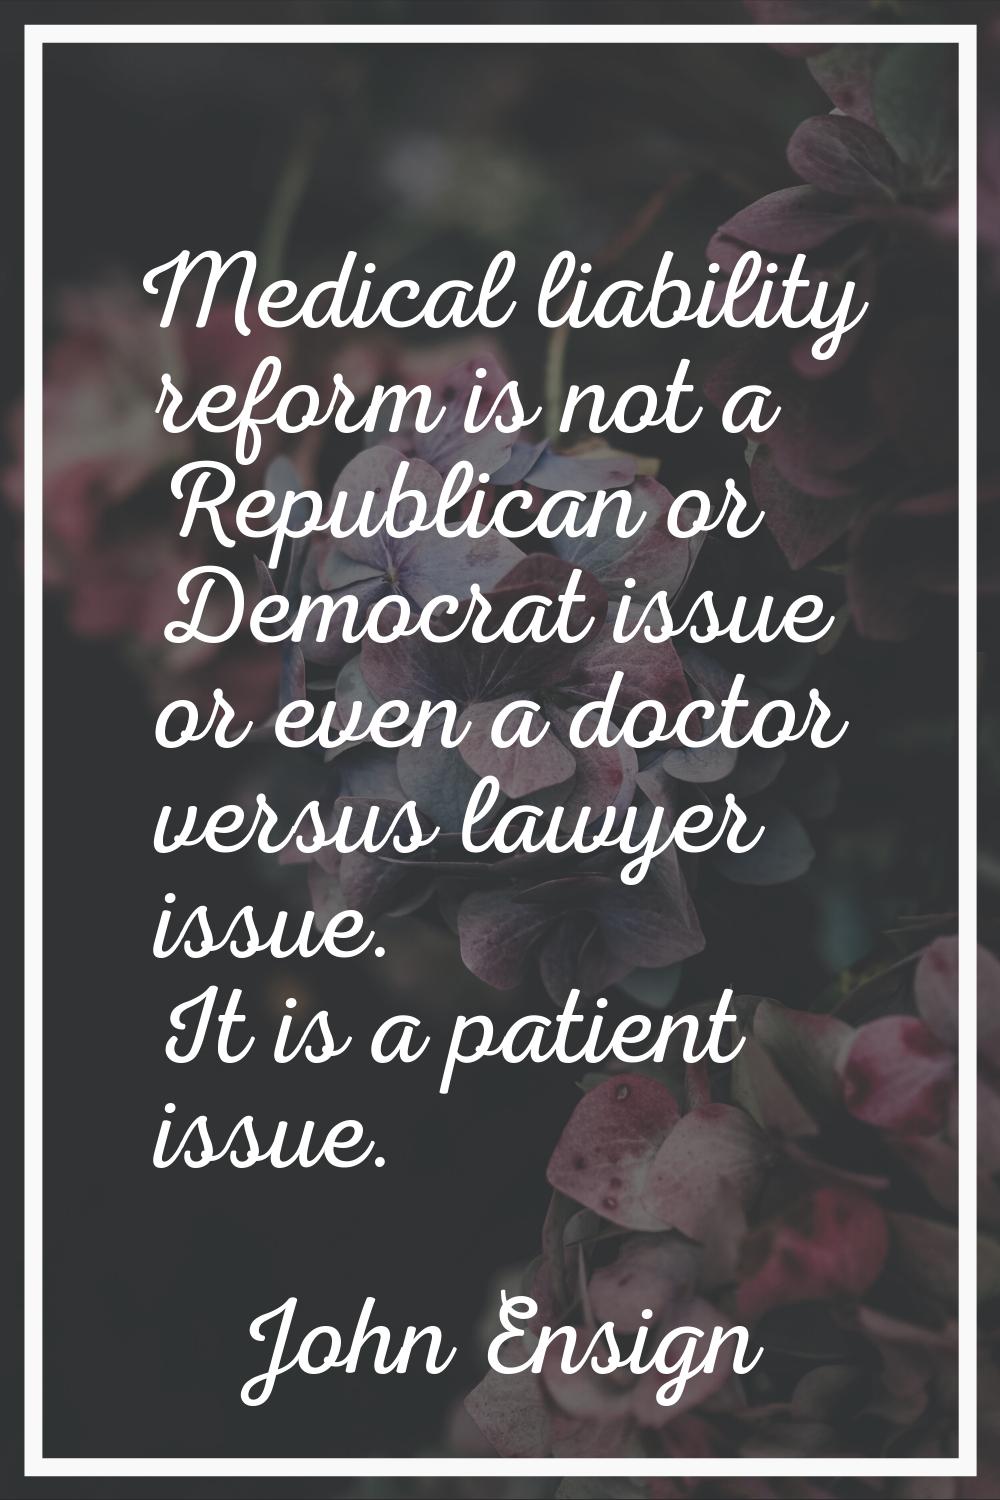 Medical liability reform is not a Republican or Democrat issue or even a doctor versus lawyer issue